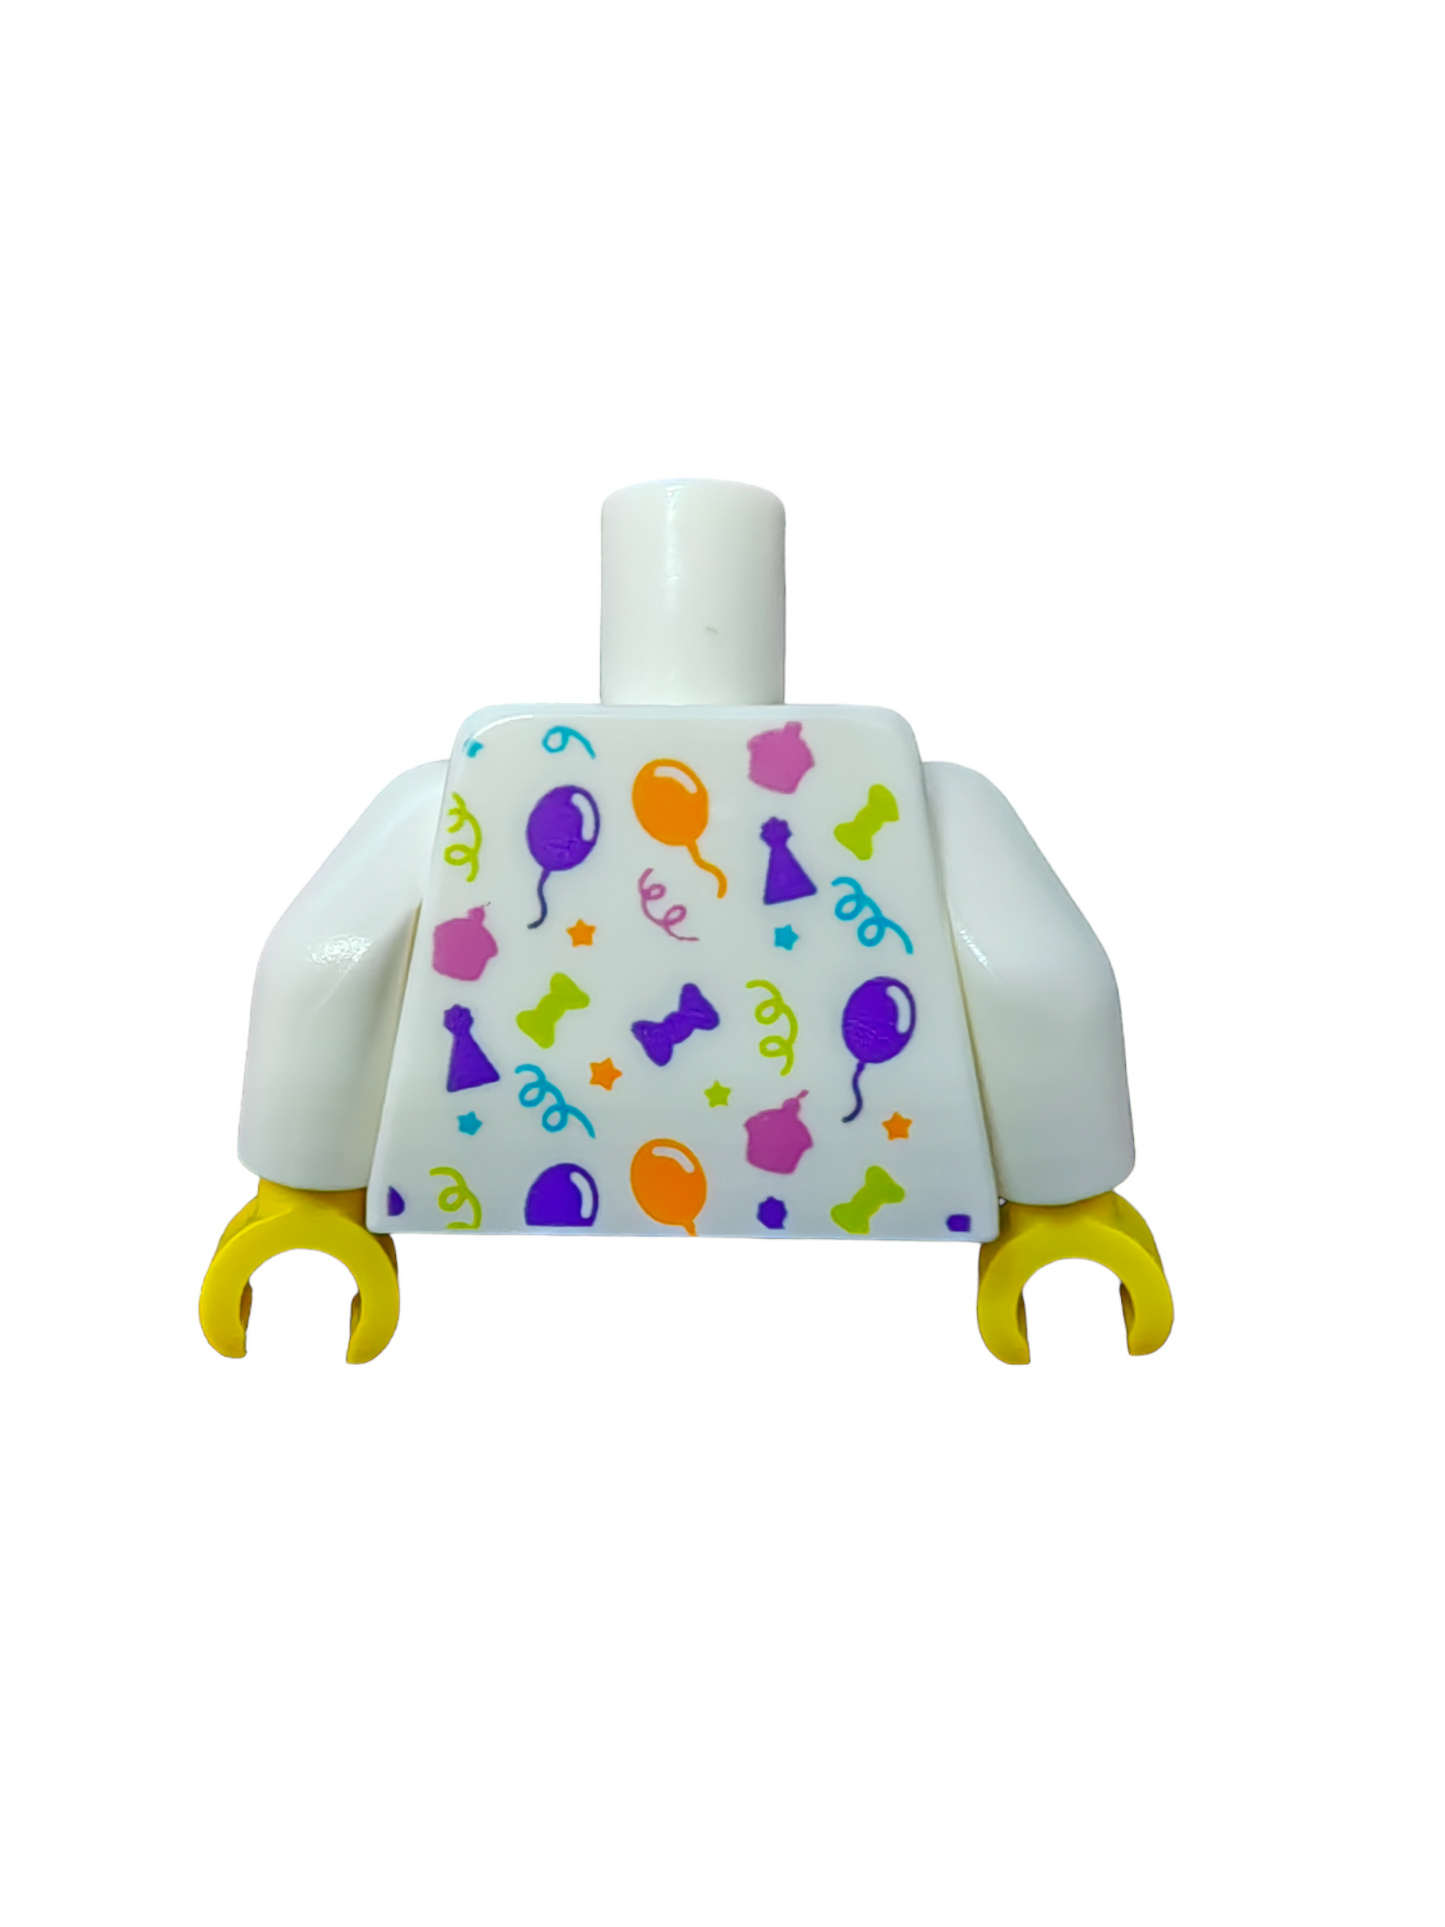 LEGO Torso, Celebration with Balloons and Bright Colours - UB1080